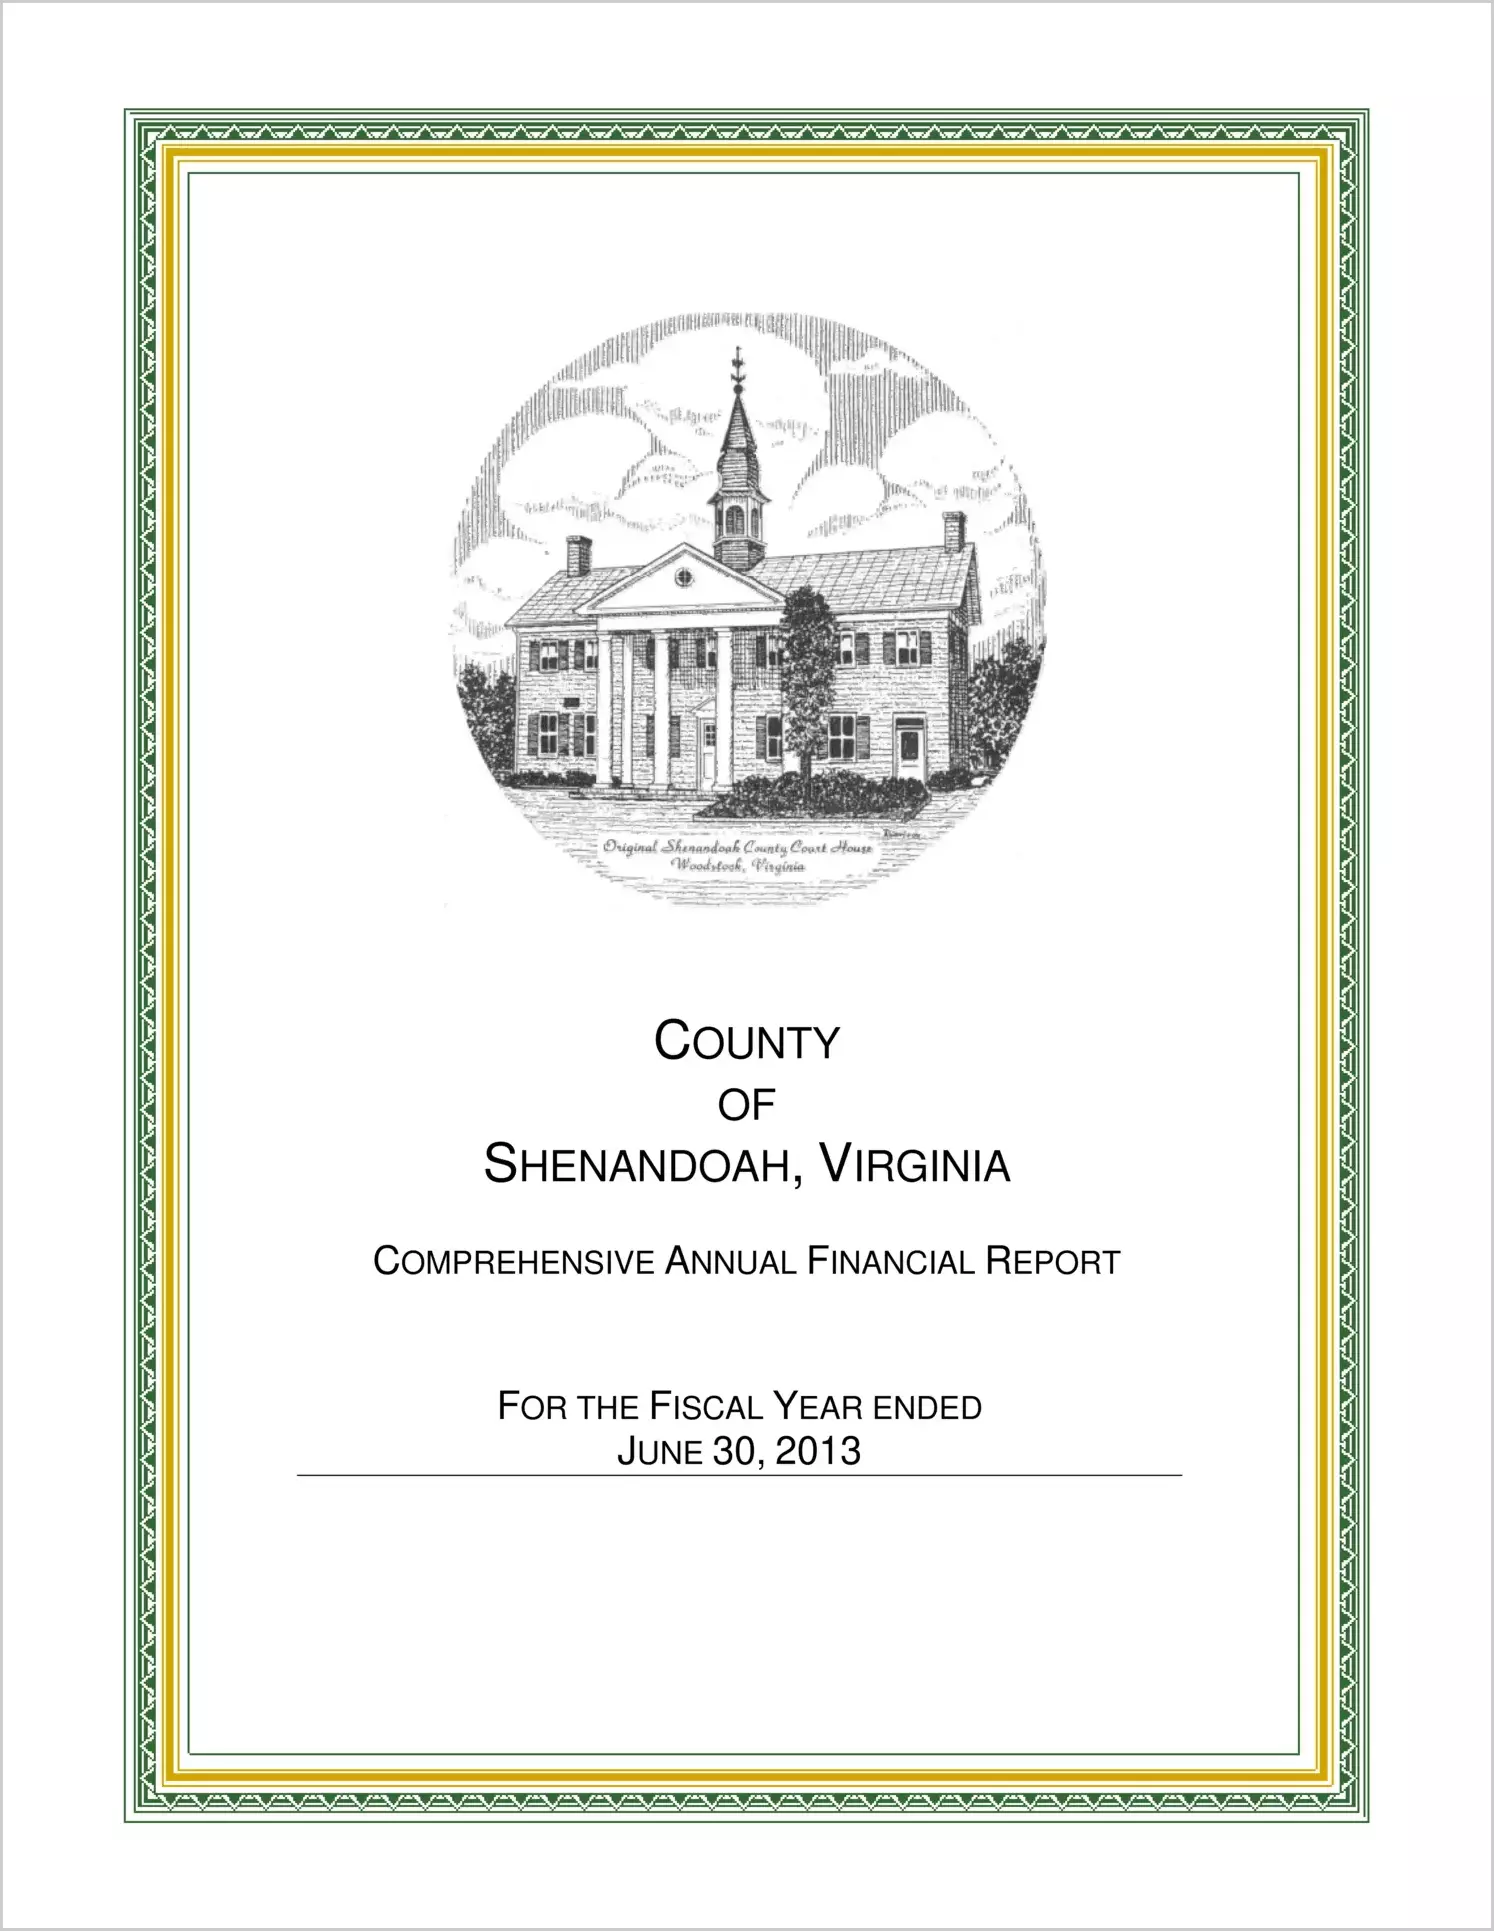 2013 Annual Financial Report for County of Shenandoah